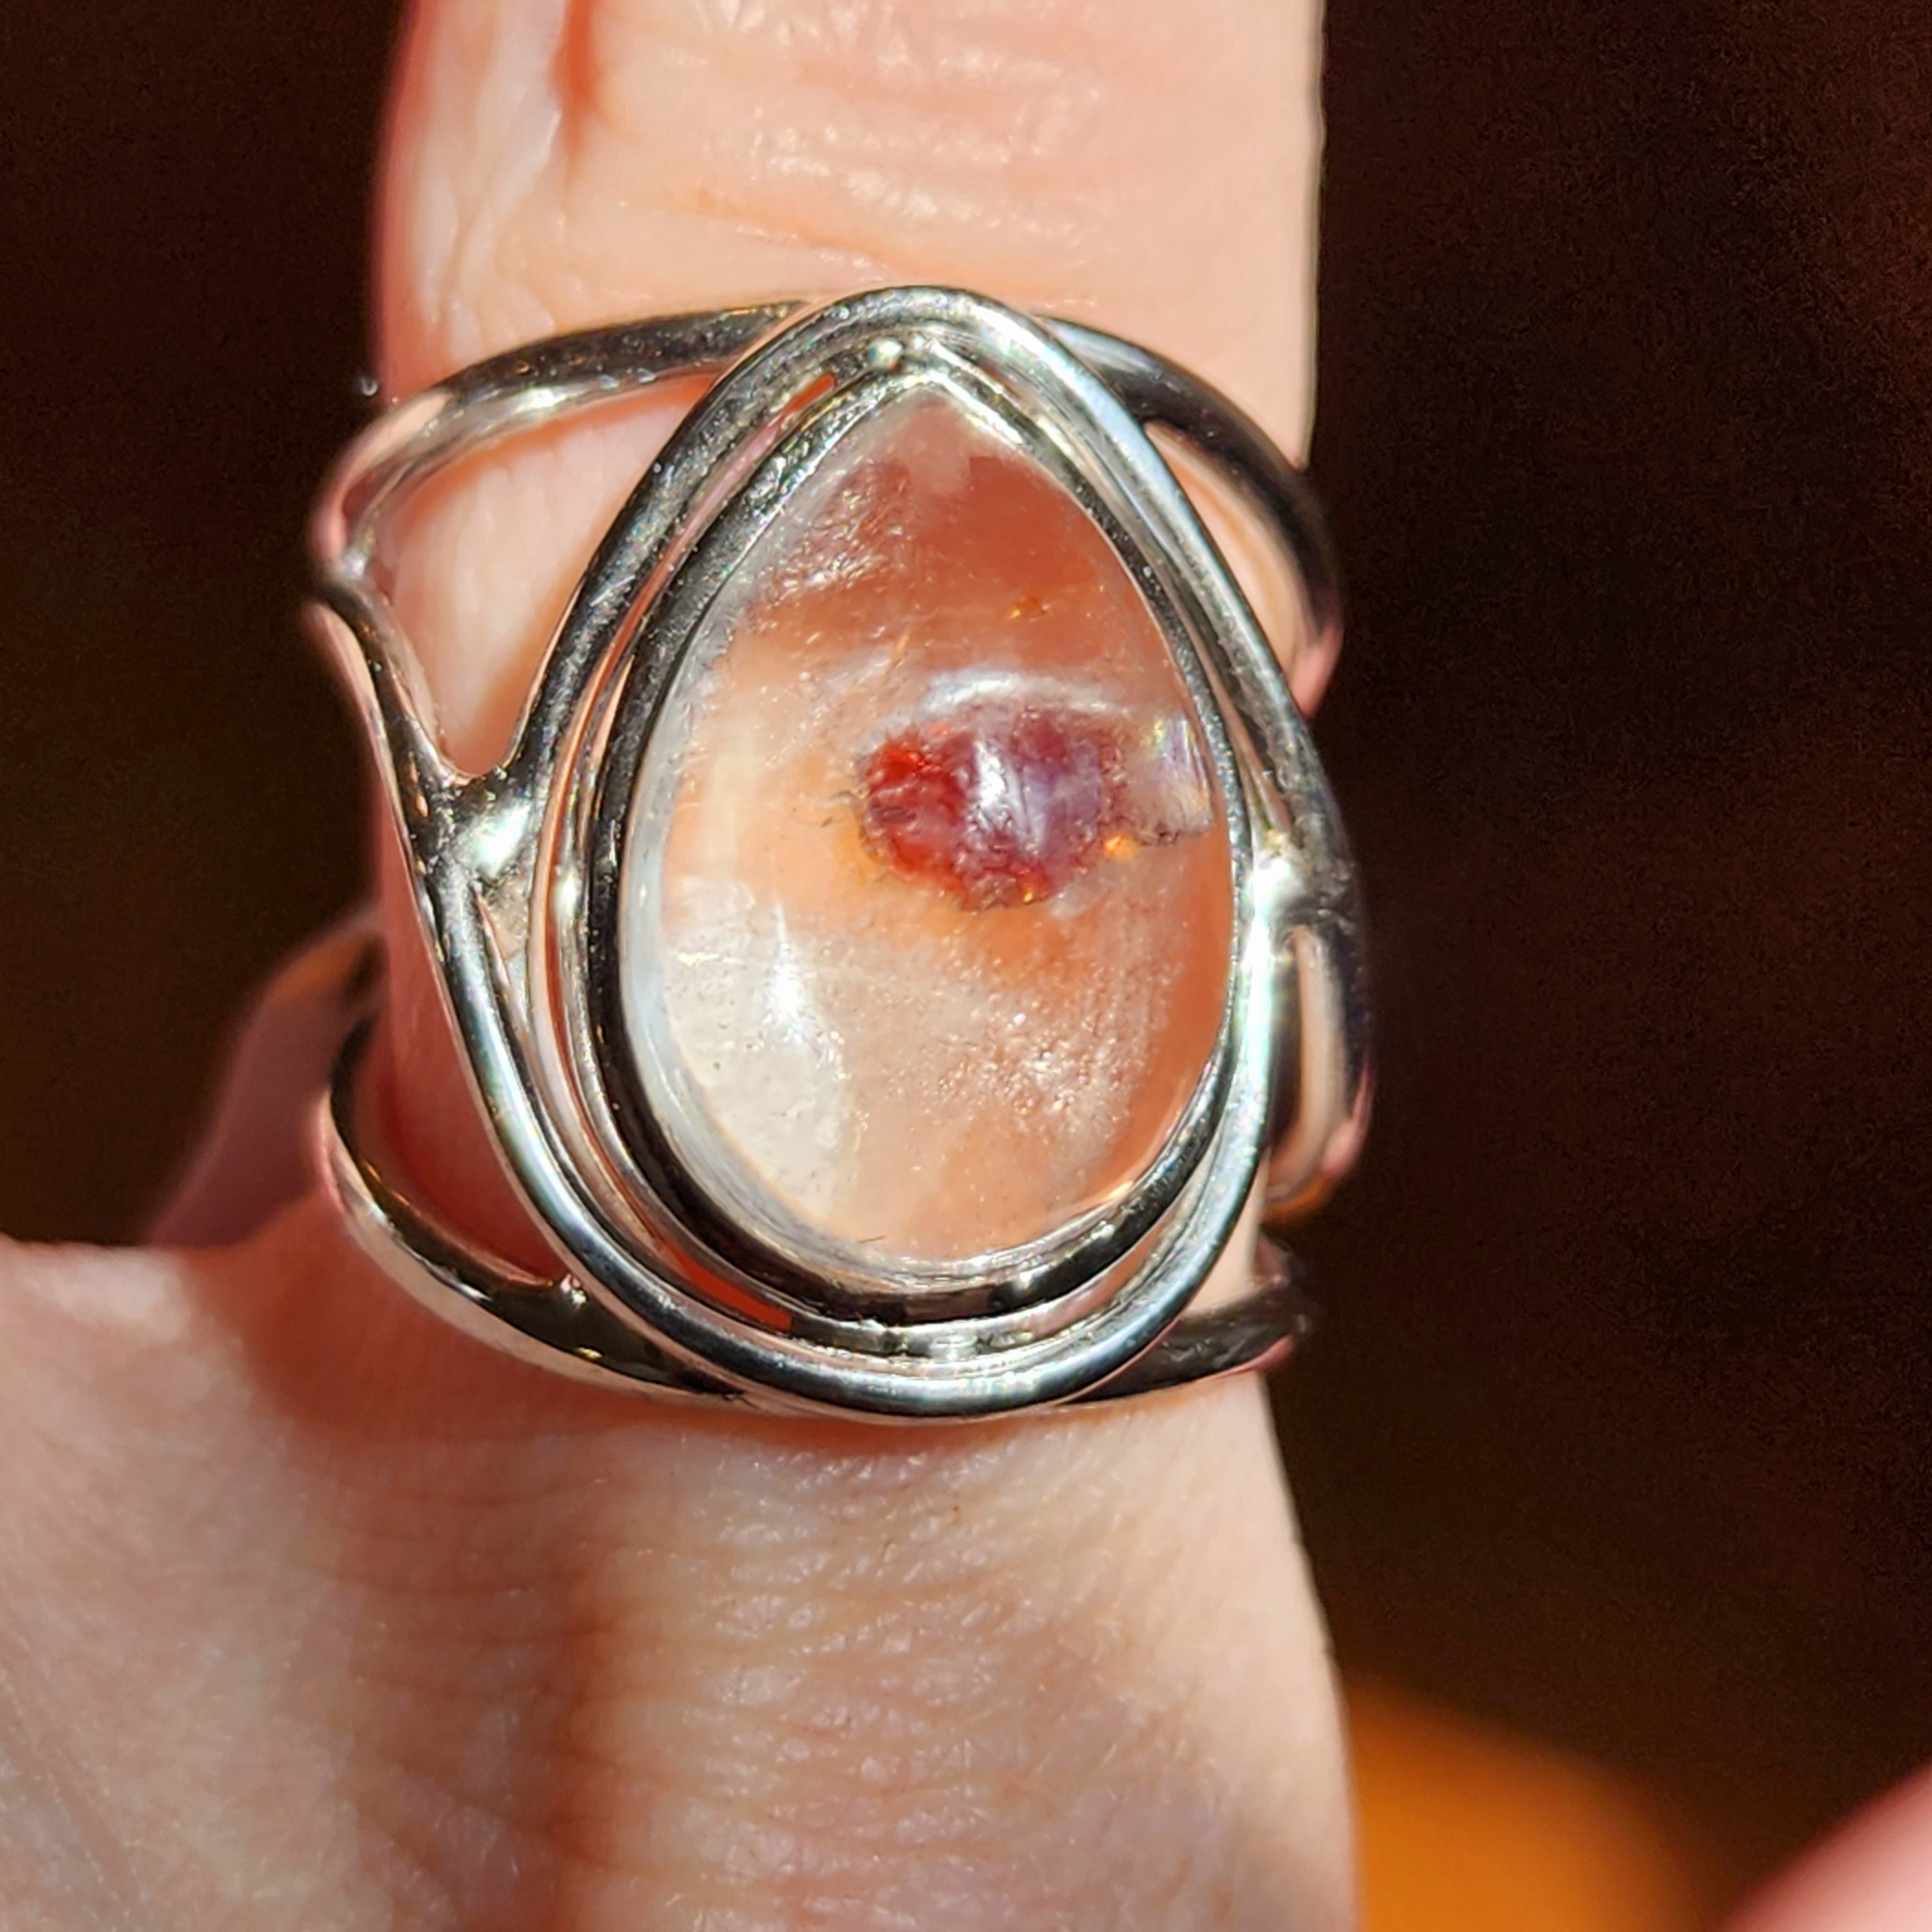 Garnet in Quartz Finger Cuff Adjustable Ring .925 Silver for Manifesting Health, Grounding and Stability